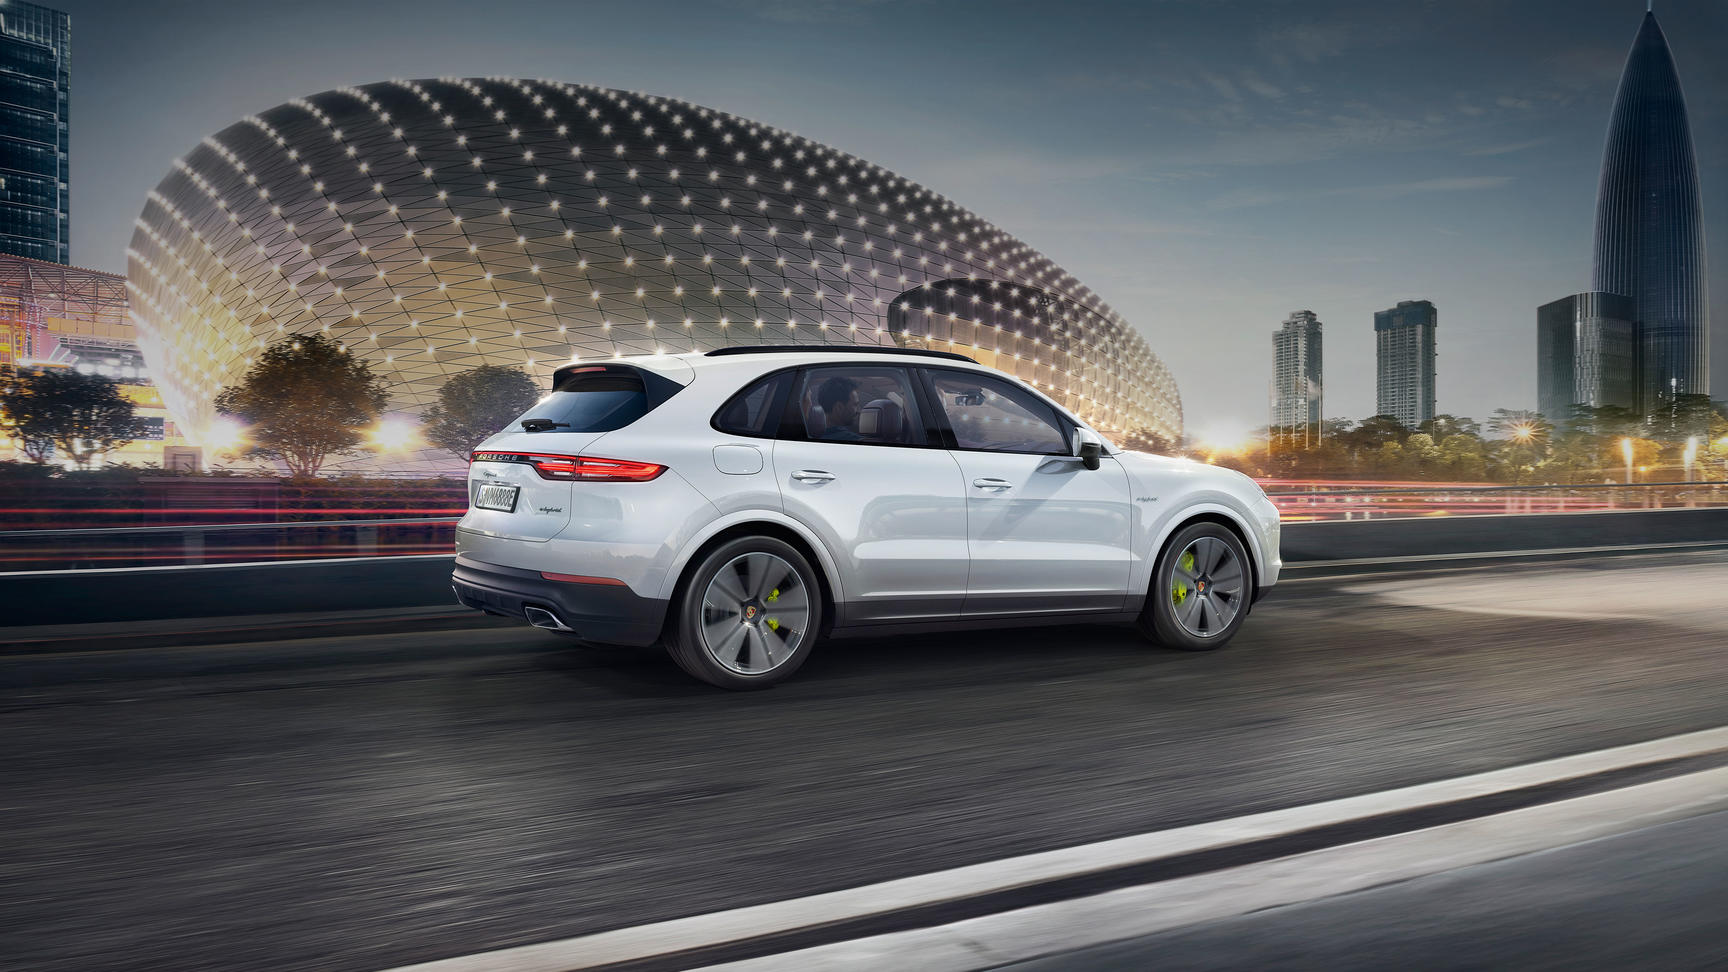 It might have shocked you when Porsche first came out with its Cayenne. An SUV from a leader in the sports car market? But it worked, and it continues to be among the most popular vehicles in the class.  Now you can equip it with a hybrid engine for better fuel economy and less environmental impact. Plus, it's actually got room to tote stuff and carry passengers in unparalleled style. If you're looking for real performance from your SUV, this one should be on your list. Of course, all of these features don't come cheap, making this one of the more expensive options.